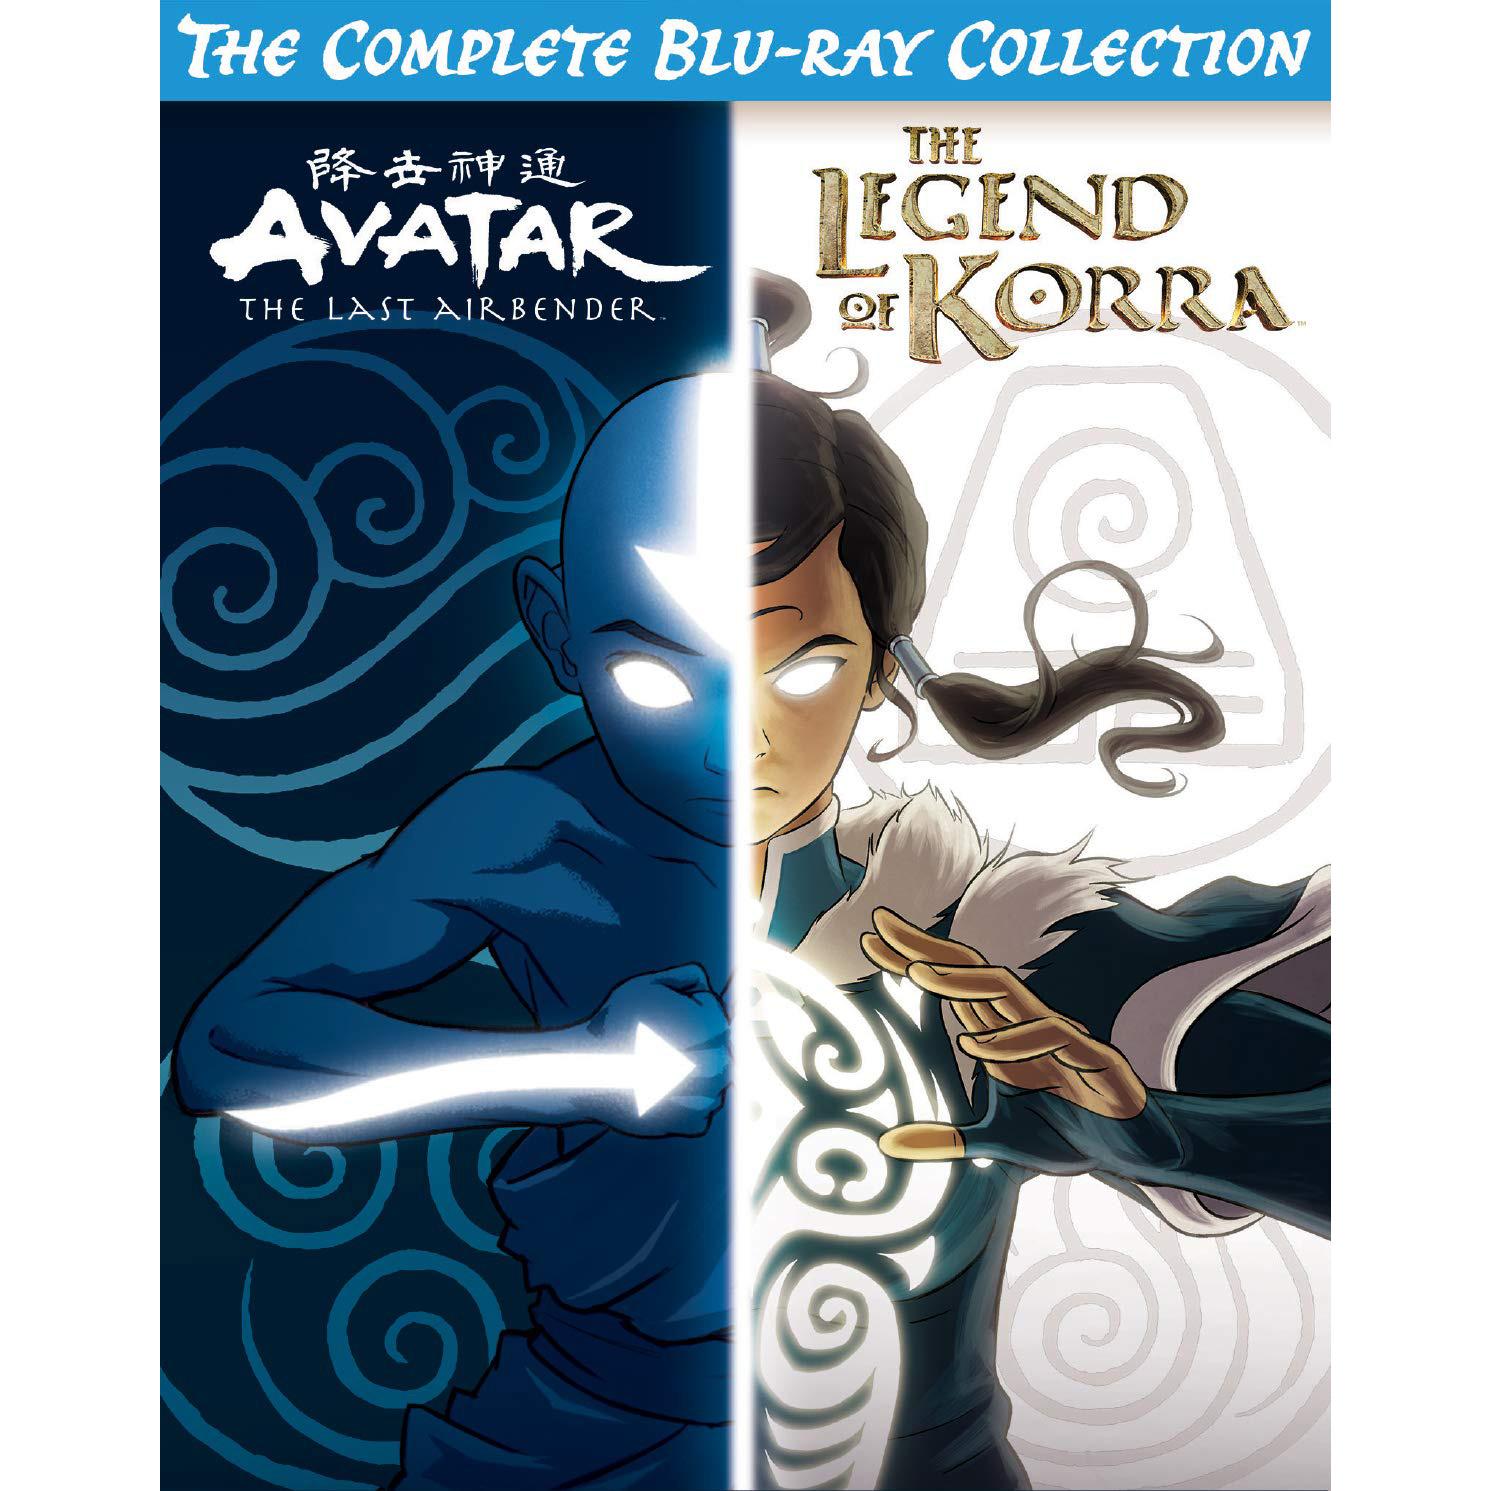 Avatar The Last Airbender and Legend of Korra Blu-ray for $28.99